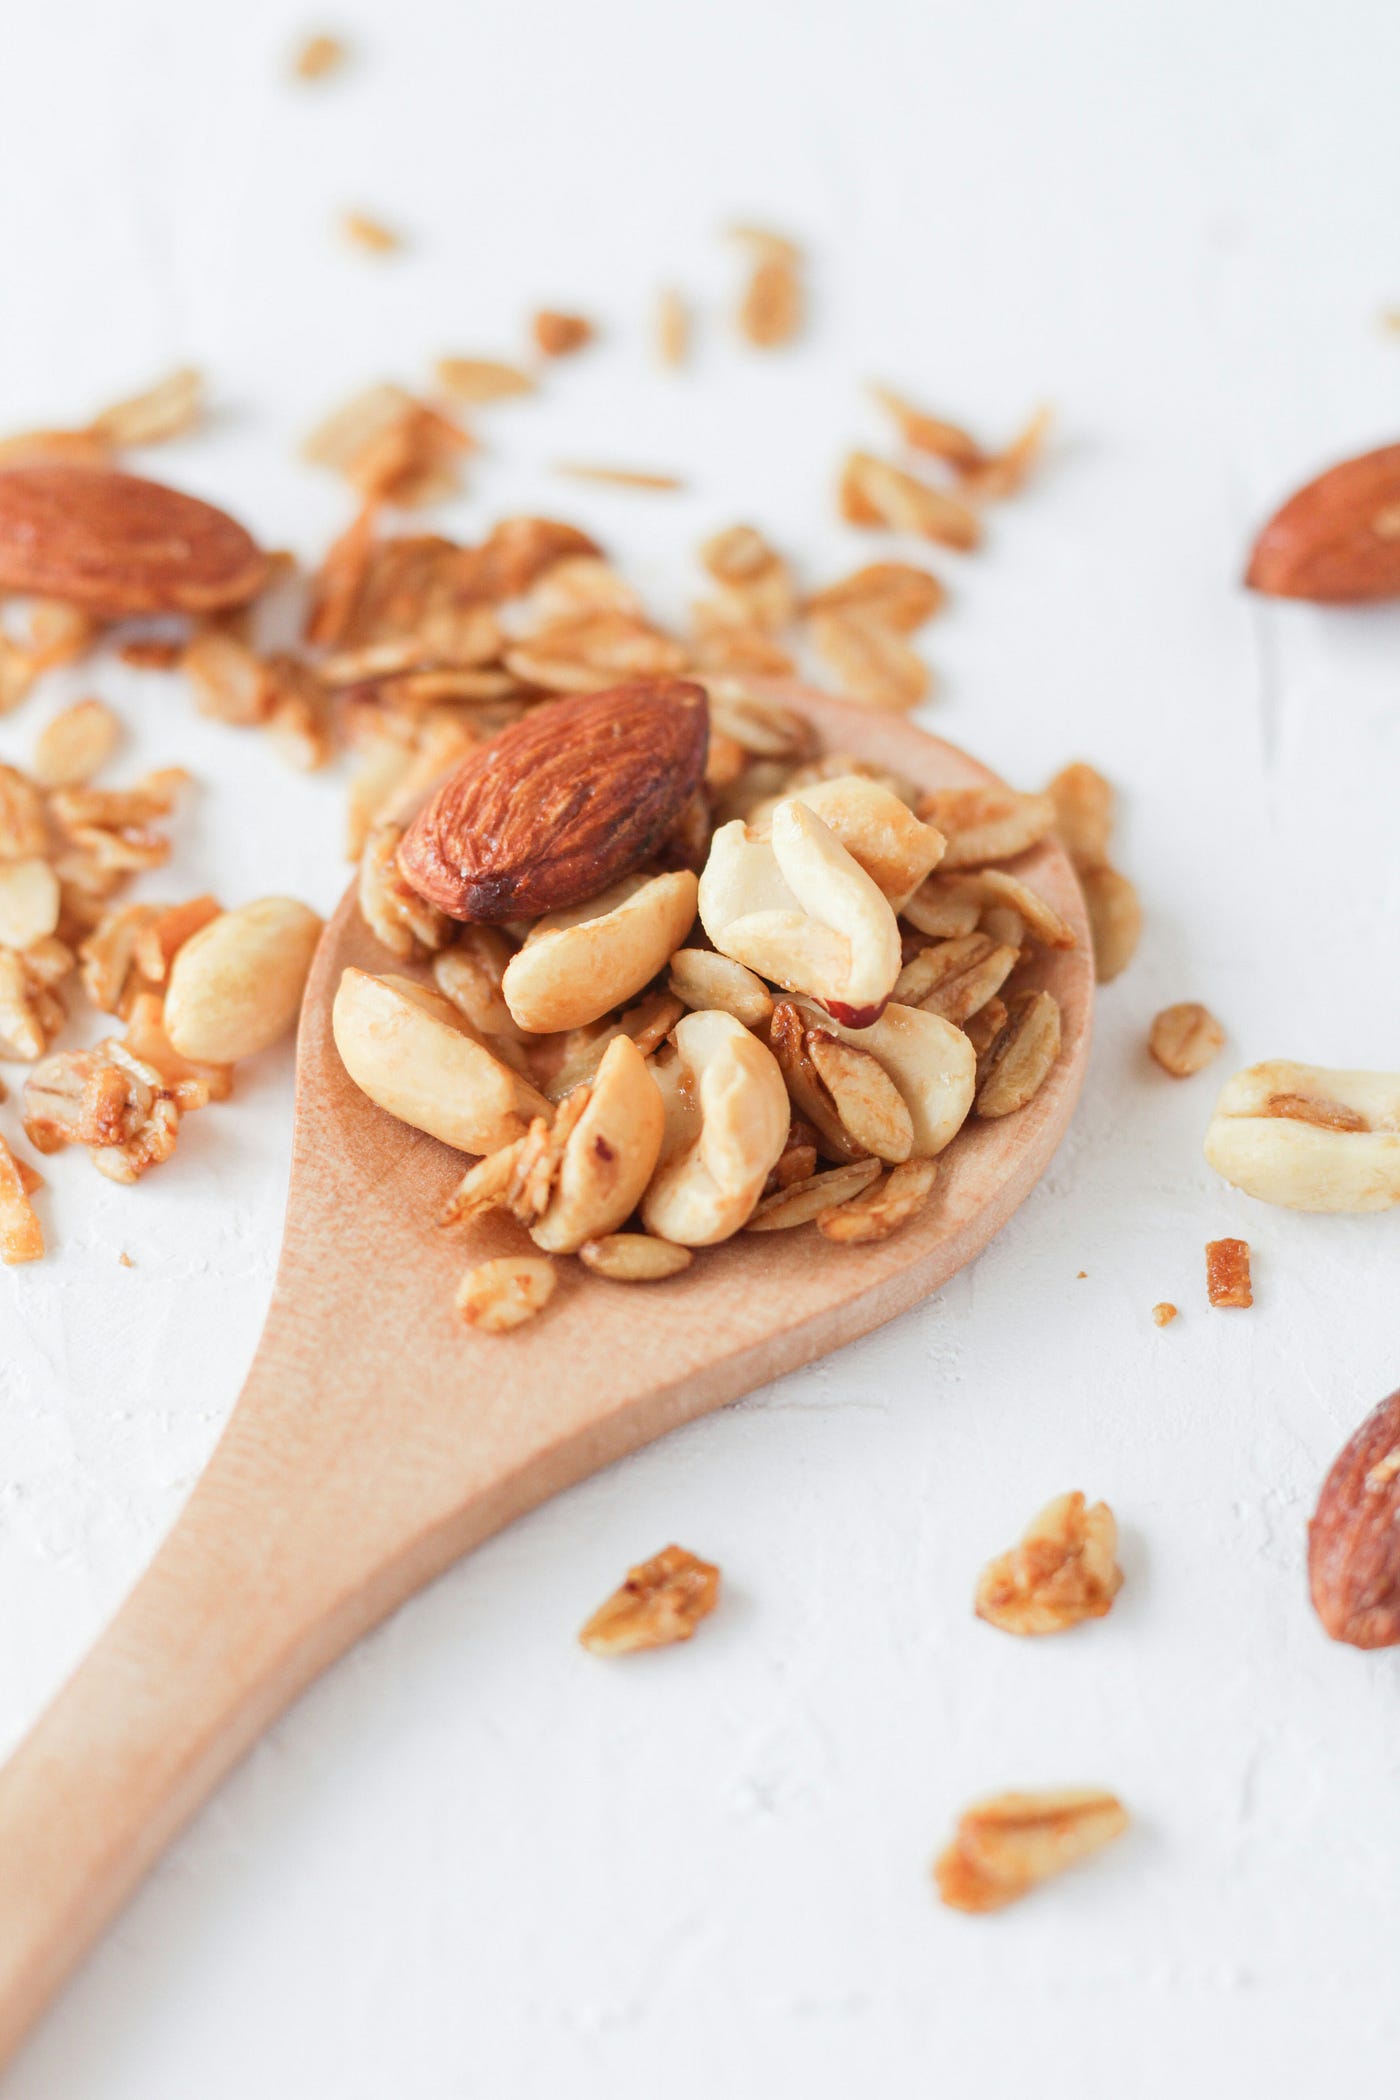 Almonds on a wooden spoon. The Atlantic diet includes nuts.